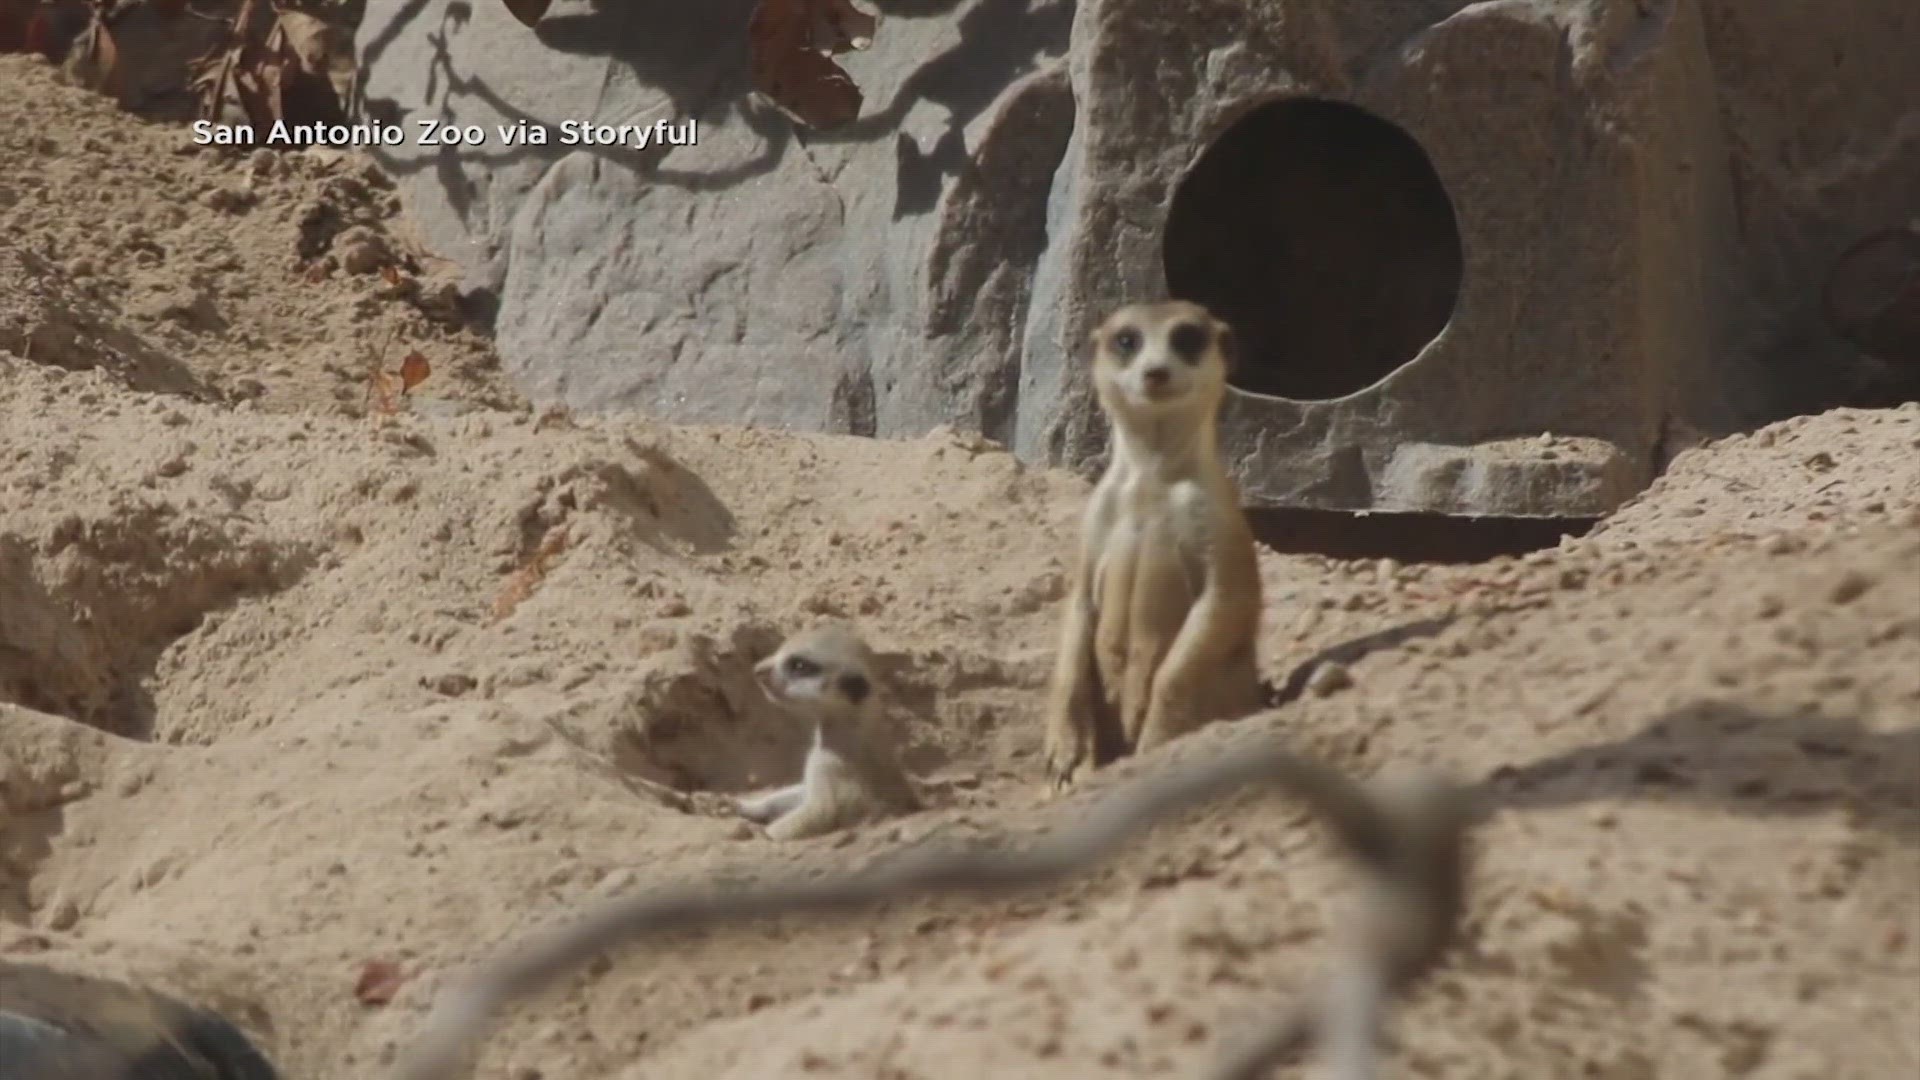 The video from the zoo shows the pups poking their heads out of the ground.